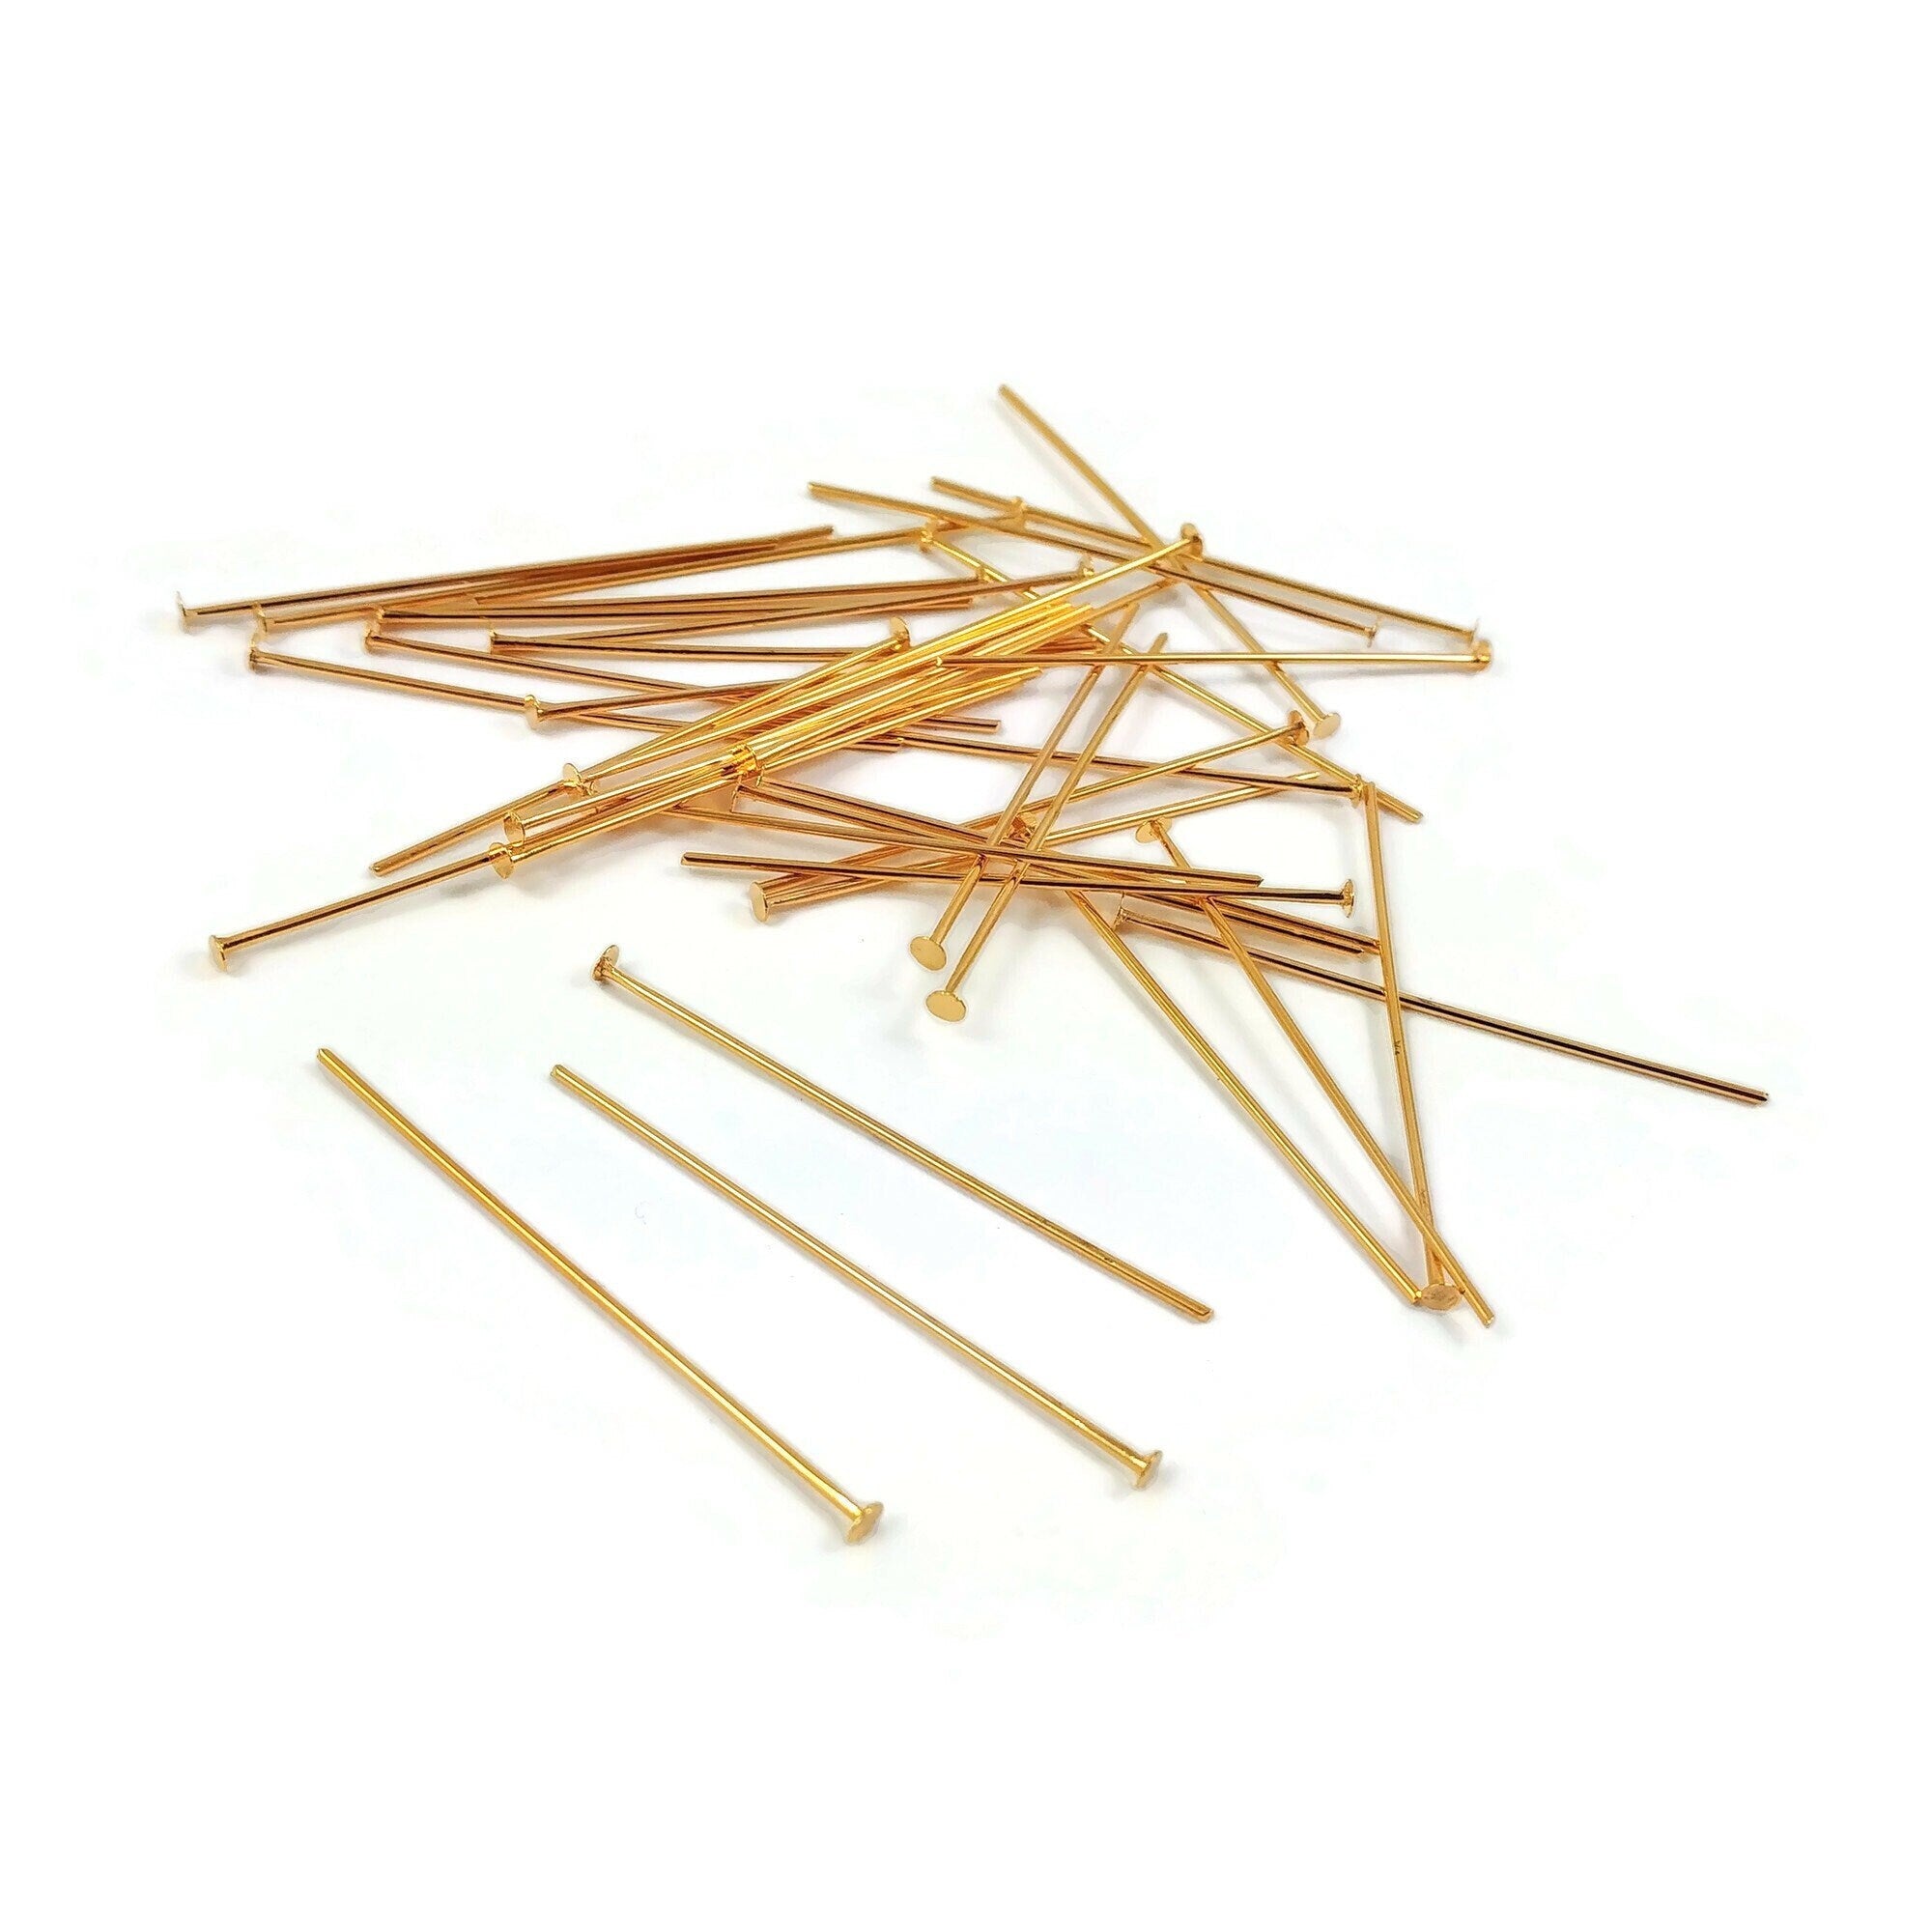 Real 18K gold plated head pins - 20mm or 35mm - Nickel free jewelry findings - 21 gauge